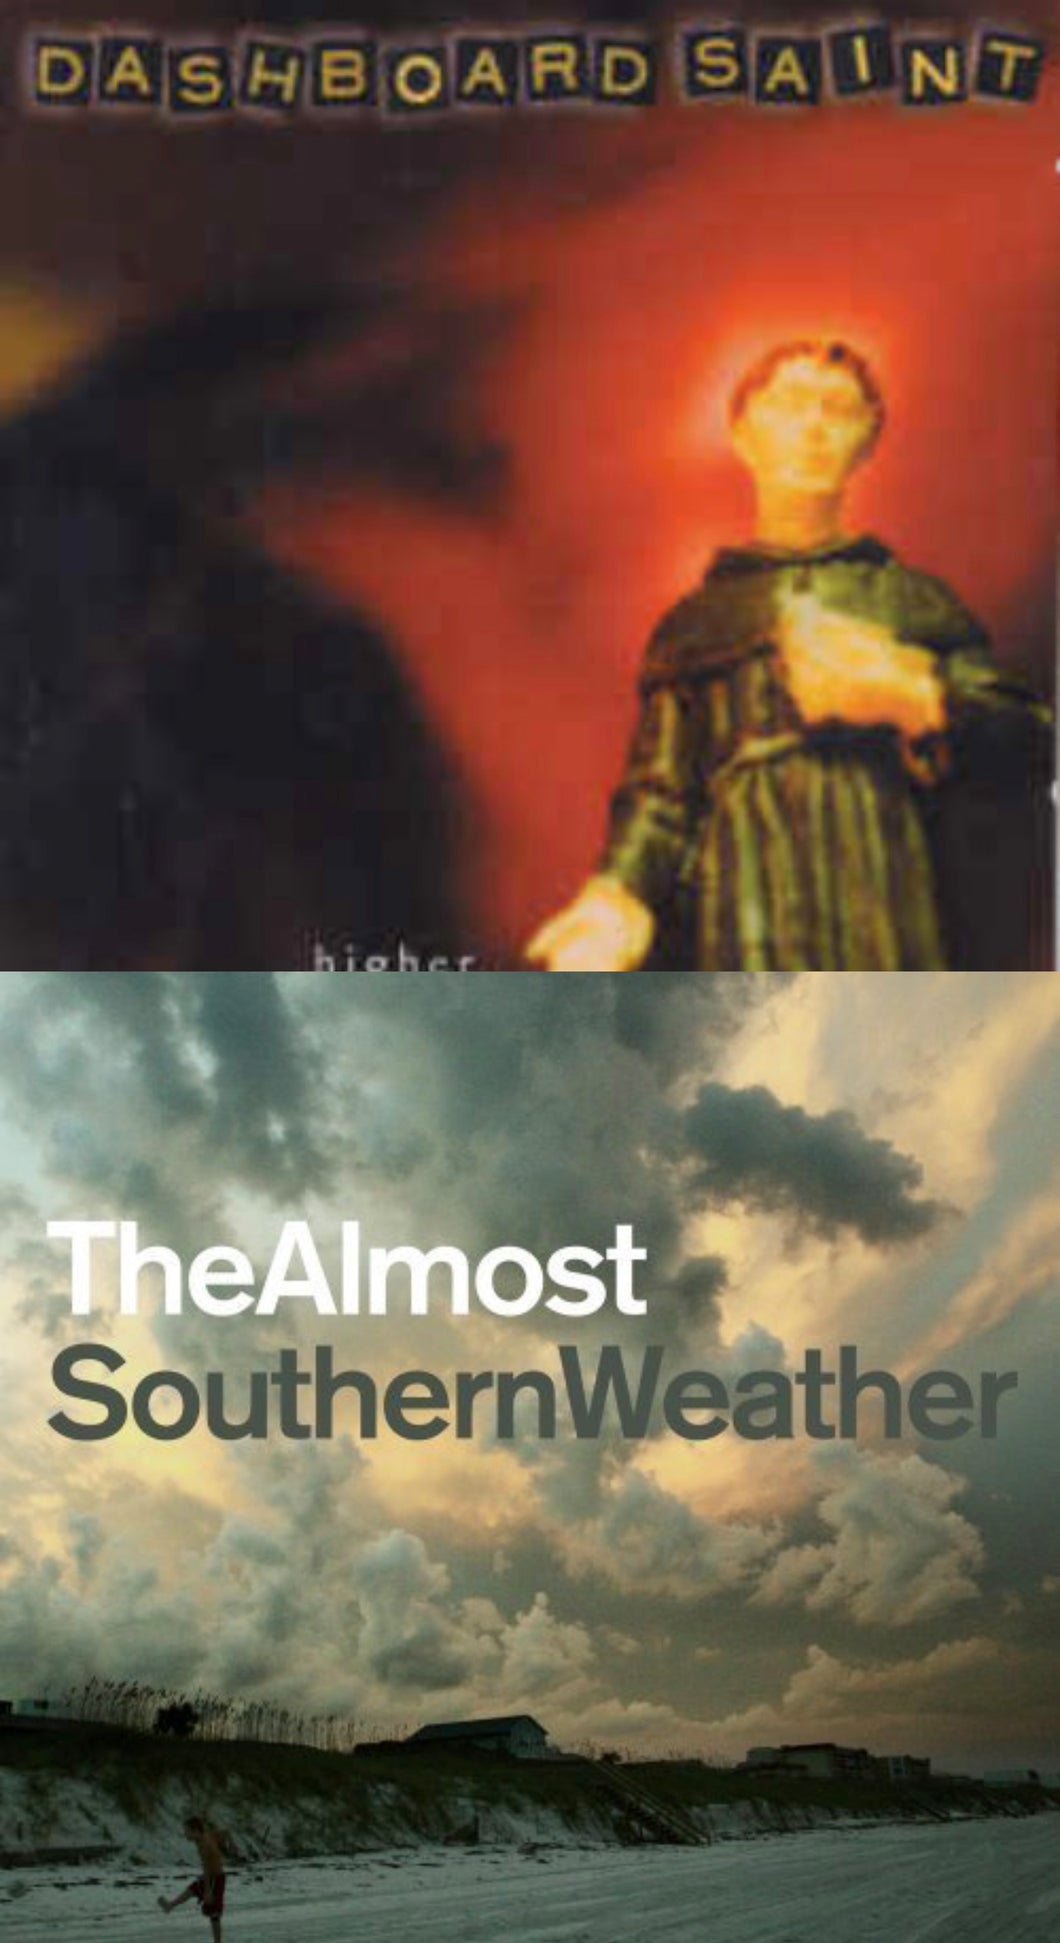 Dashboard Saint Higher + The Almost Southern Weather 2CD